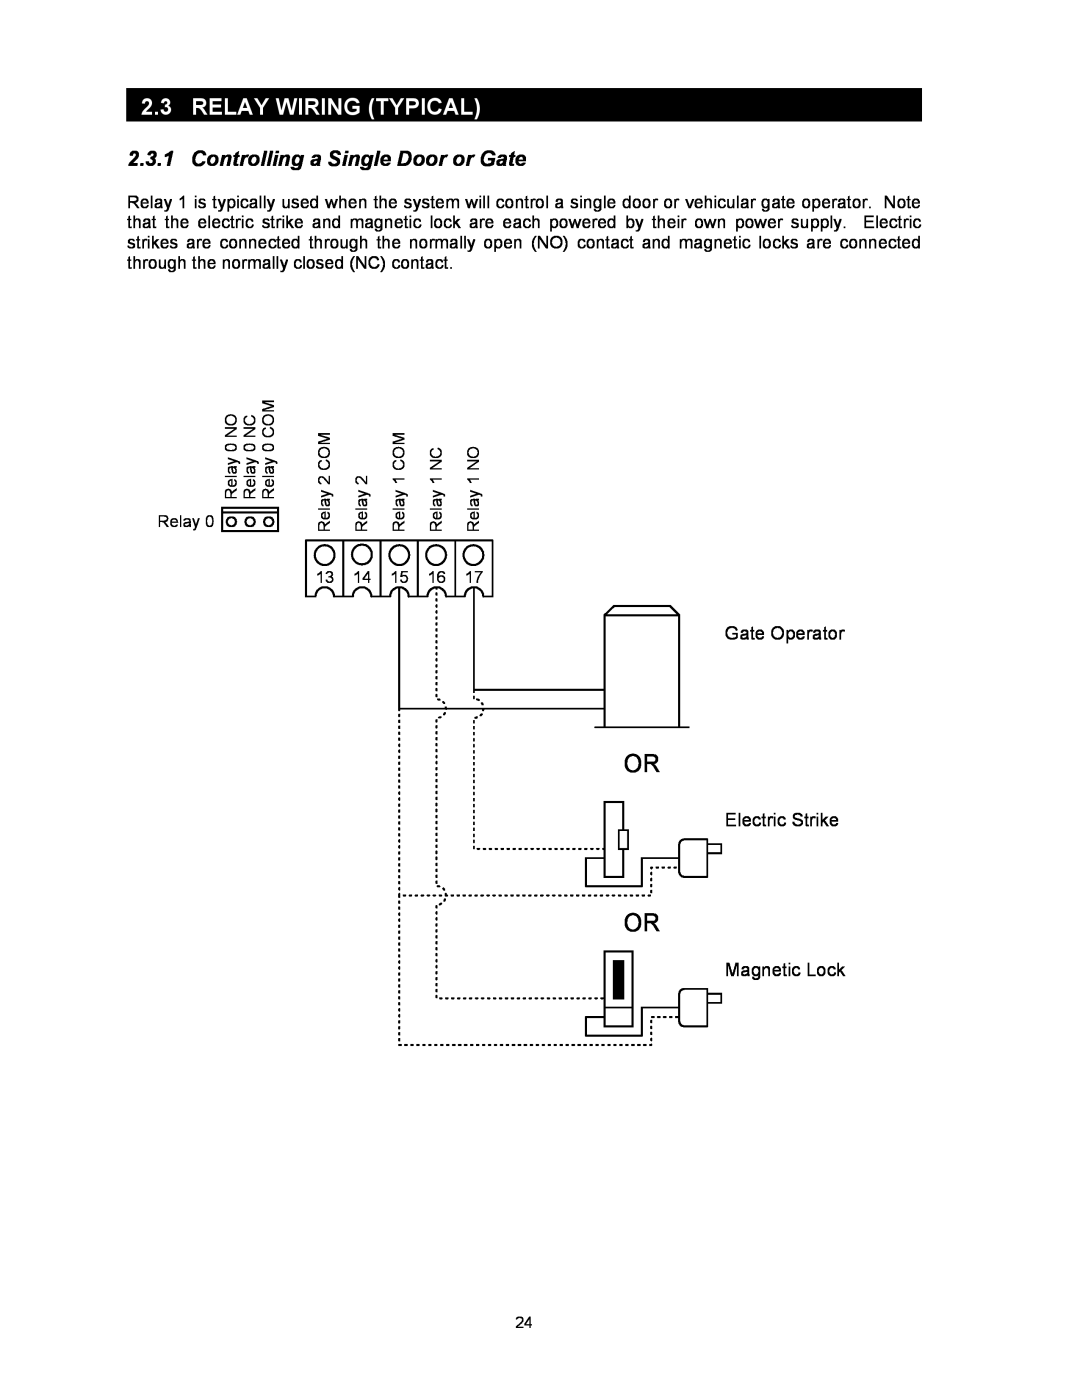 DKS Enterprises 1815, 1803PC, 1817 Relay Wiring Typical, Controlling a Single Door or Gate, Gate Operator, Electric Strike 